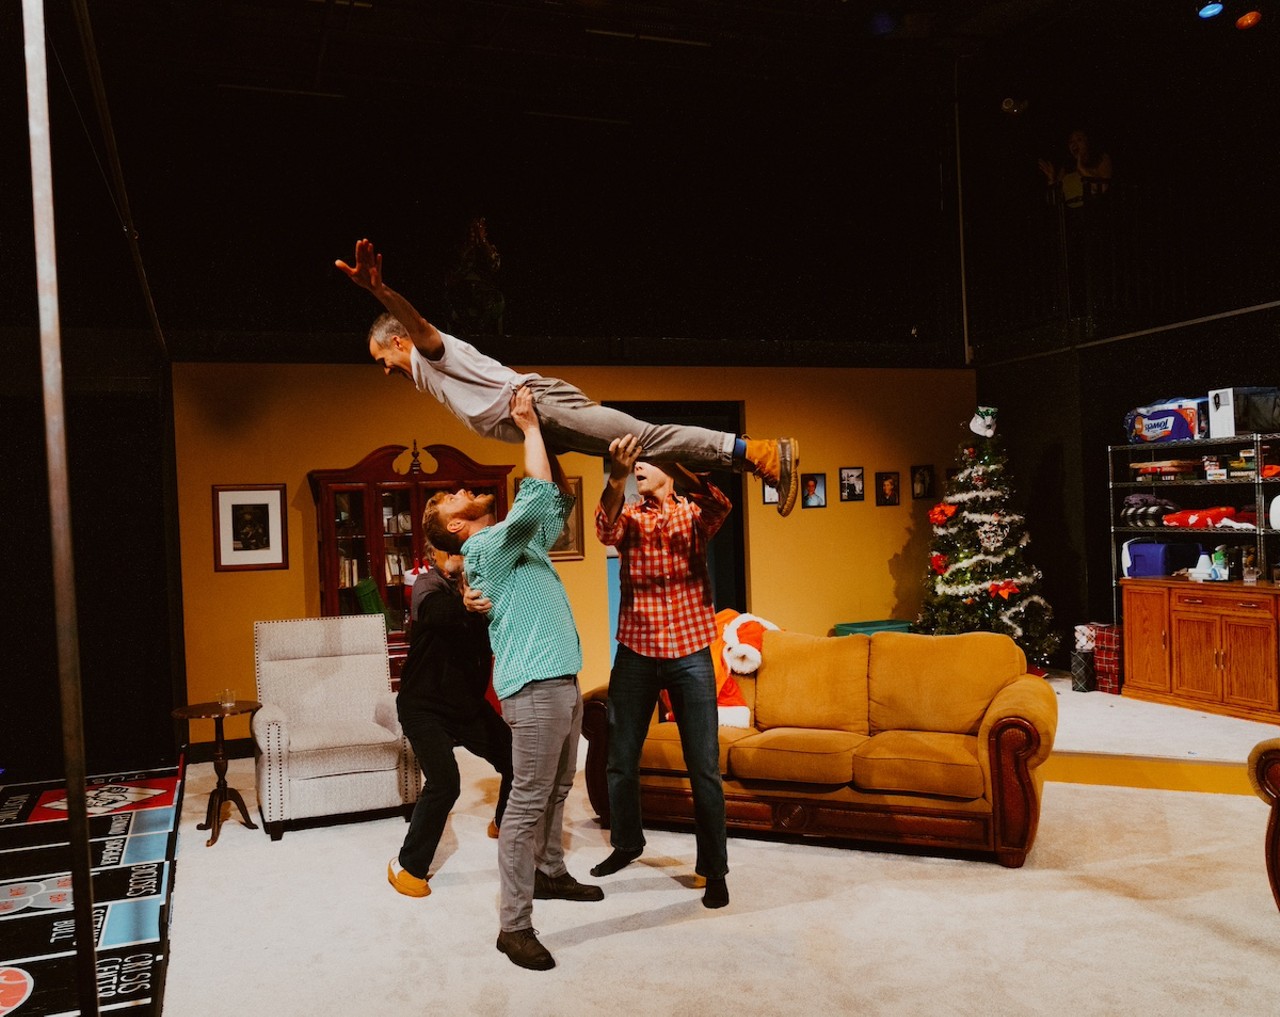 Review: Tampa Rep’s ‘Straight White Men’ offers a nuanced look inside complicated family dynamics